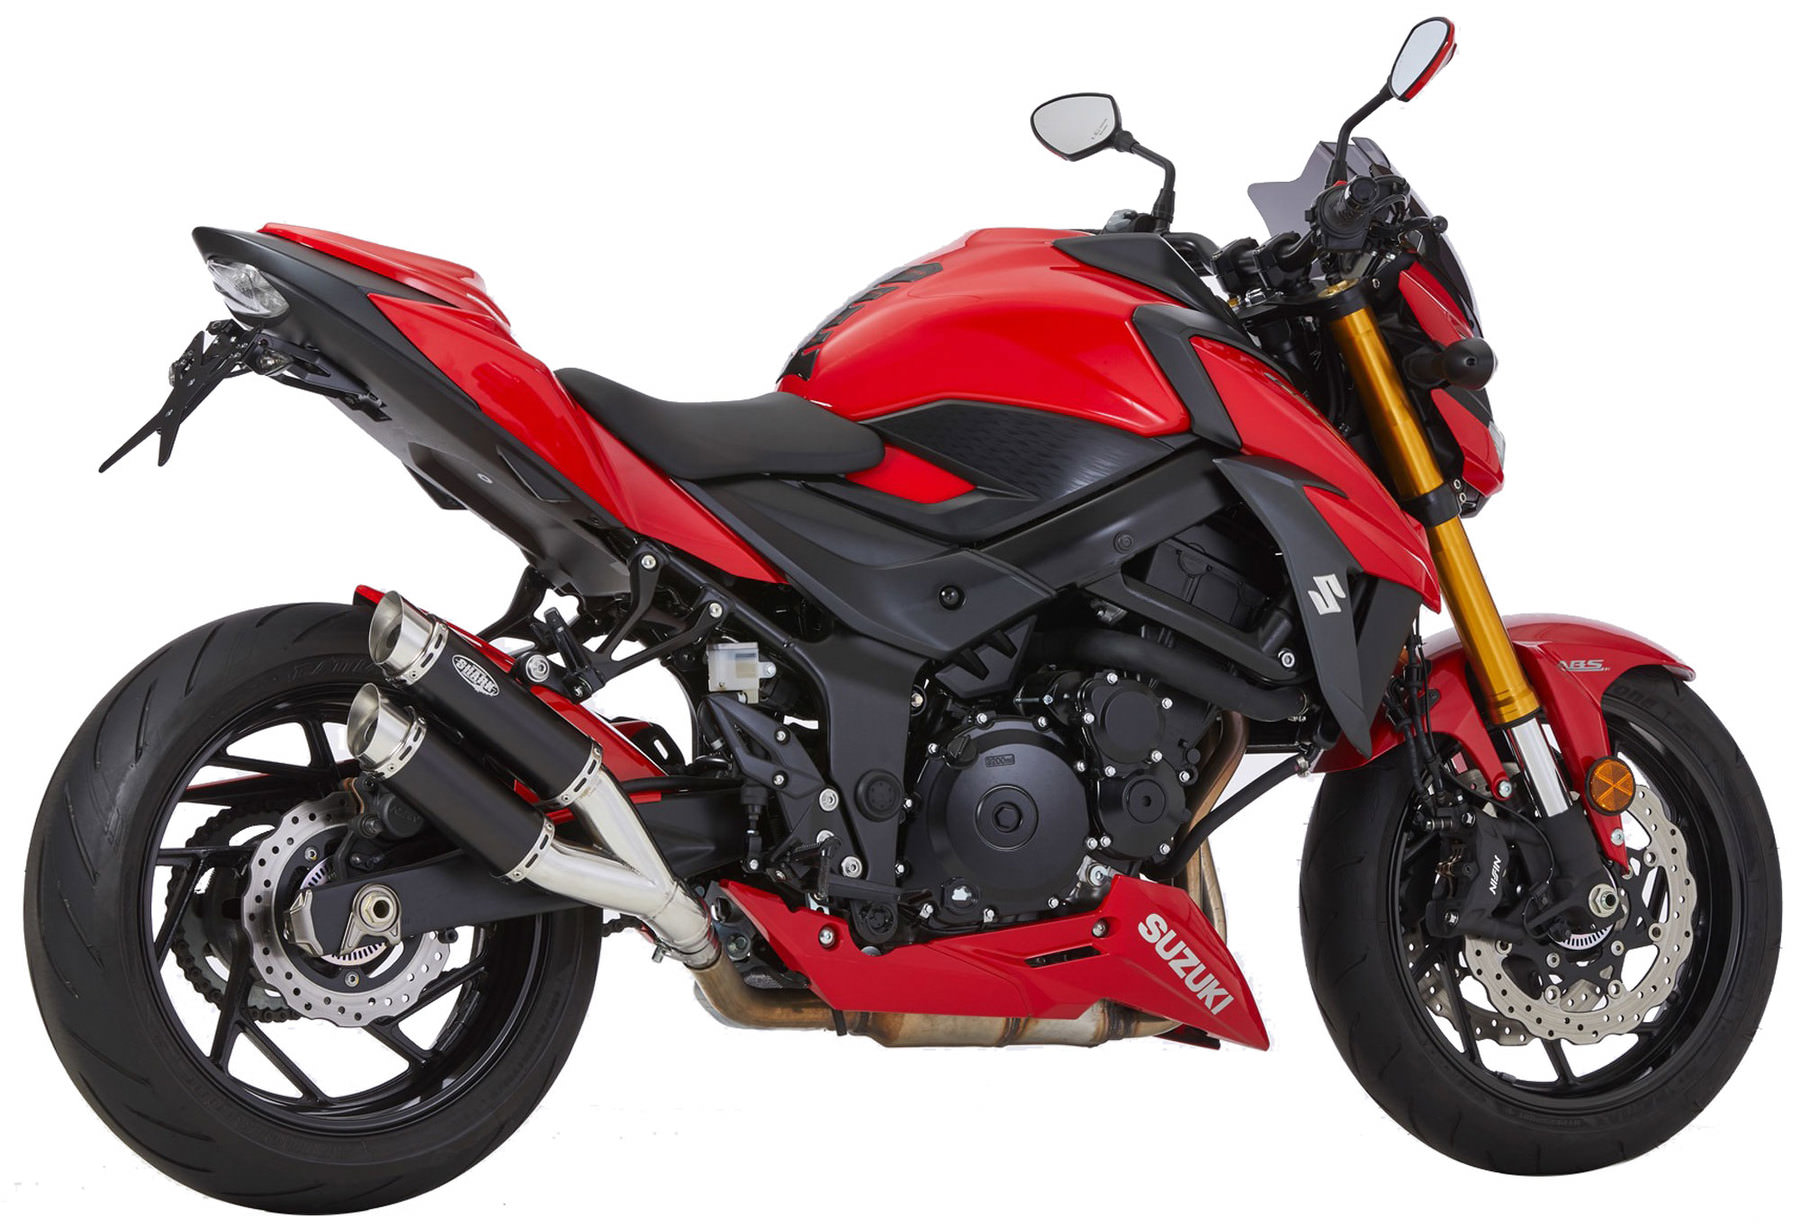 Buy SHARK Track Exhausts | Louis motorcycle clothing and technology